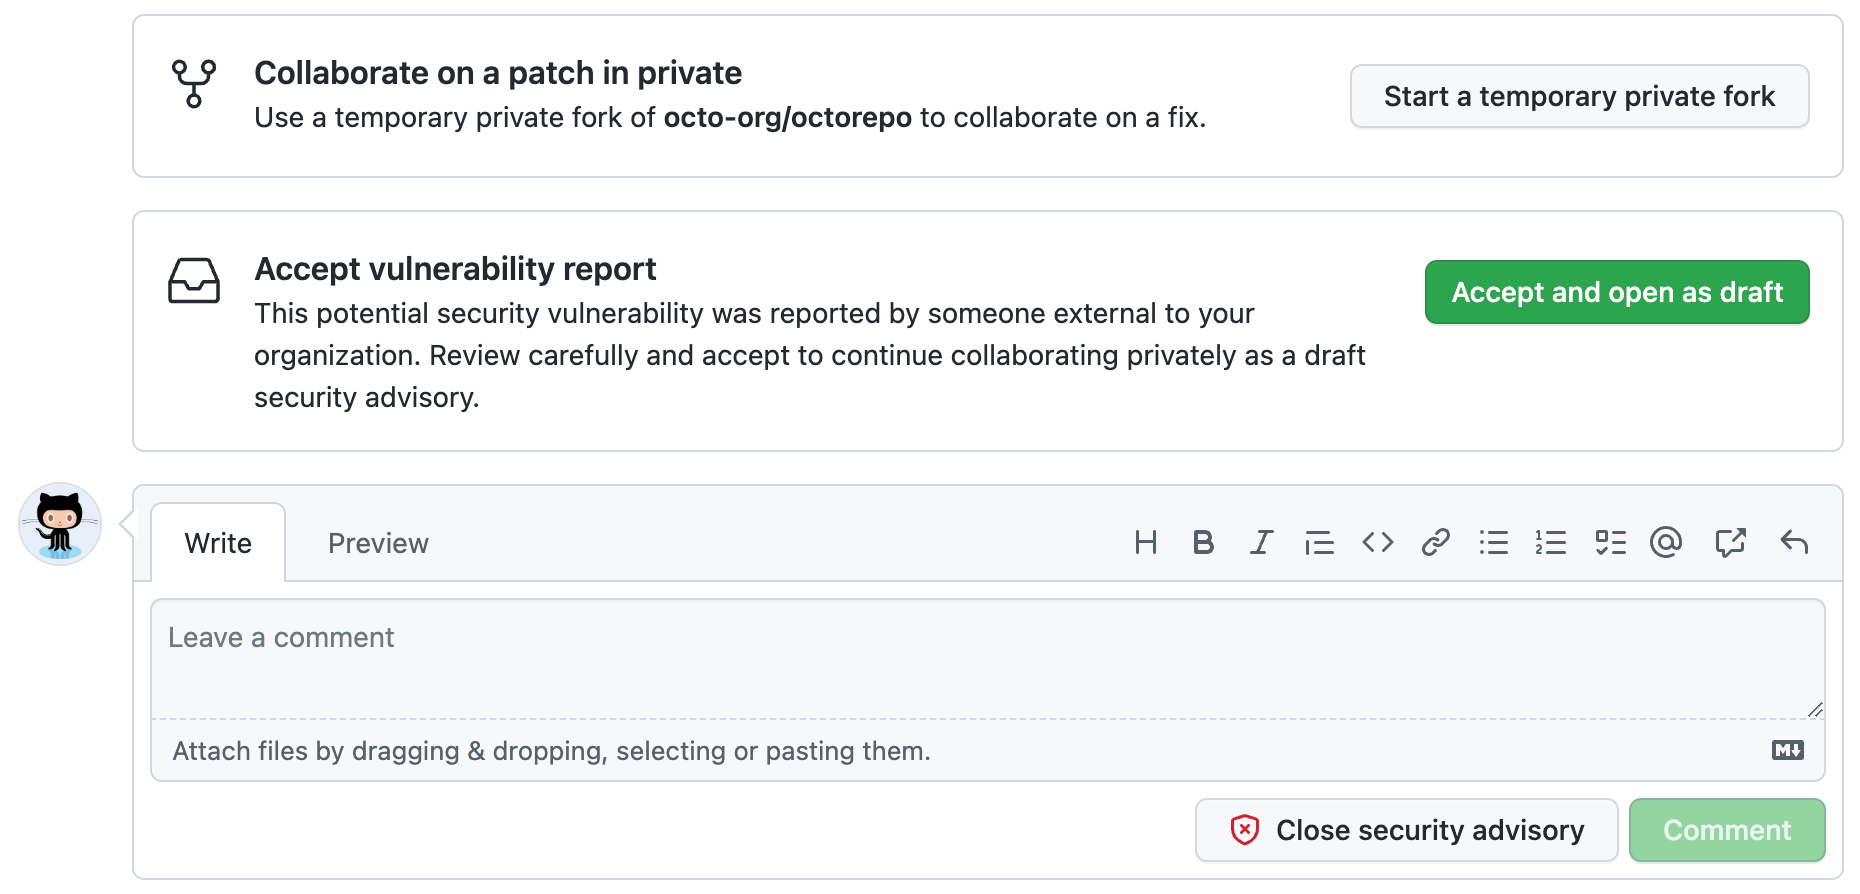 Screenshot showing the options available to the repository maintainer when reviewing an externally submitted vulnerability report.